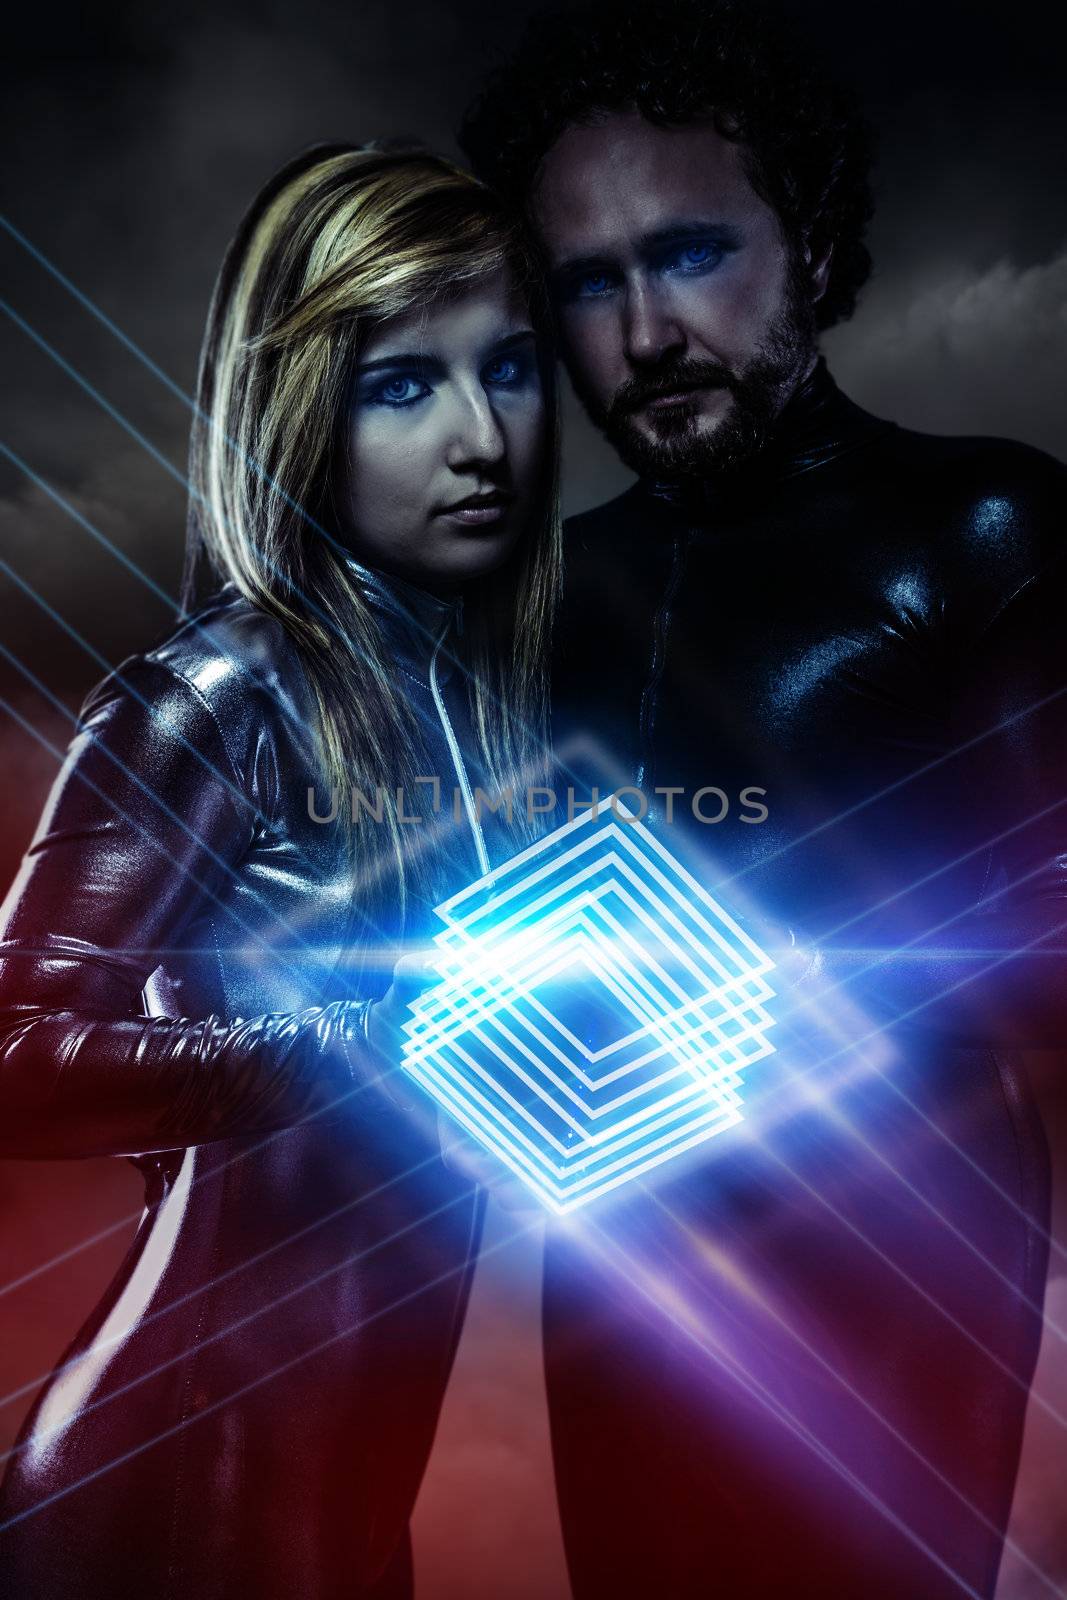 Lovers, couple of super heroes of the future holding a blue squa by FernandoCortes